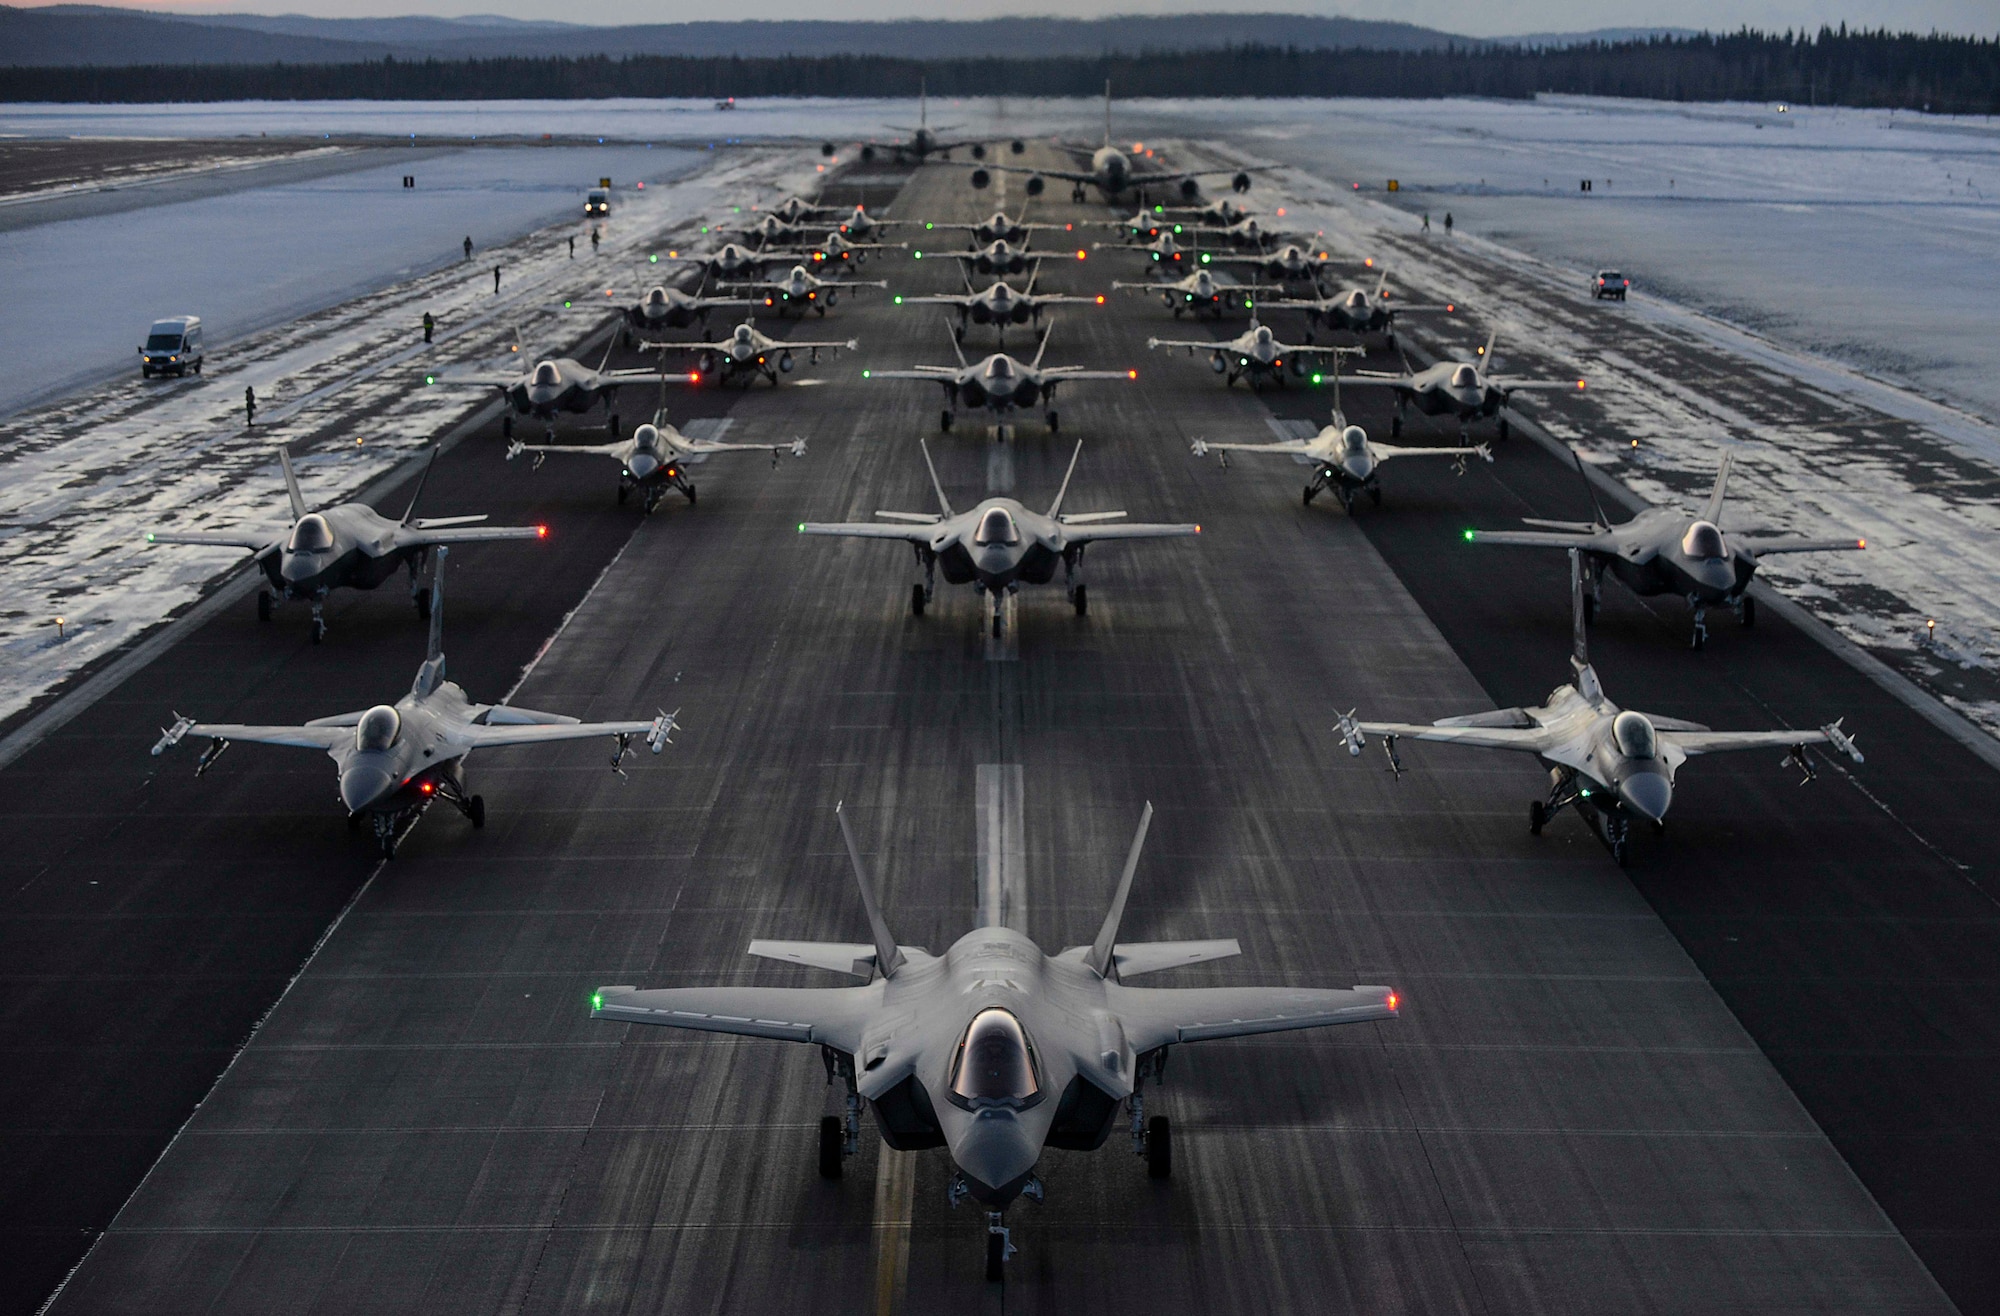 The 354th Fighter Wing and the Air National Guard’s 168th Wing aircraft line up in formation on Eielson Air Force Base, Alaska, Dec. 18, 2020.